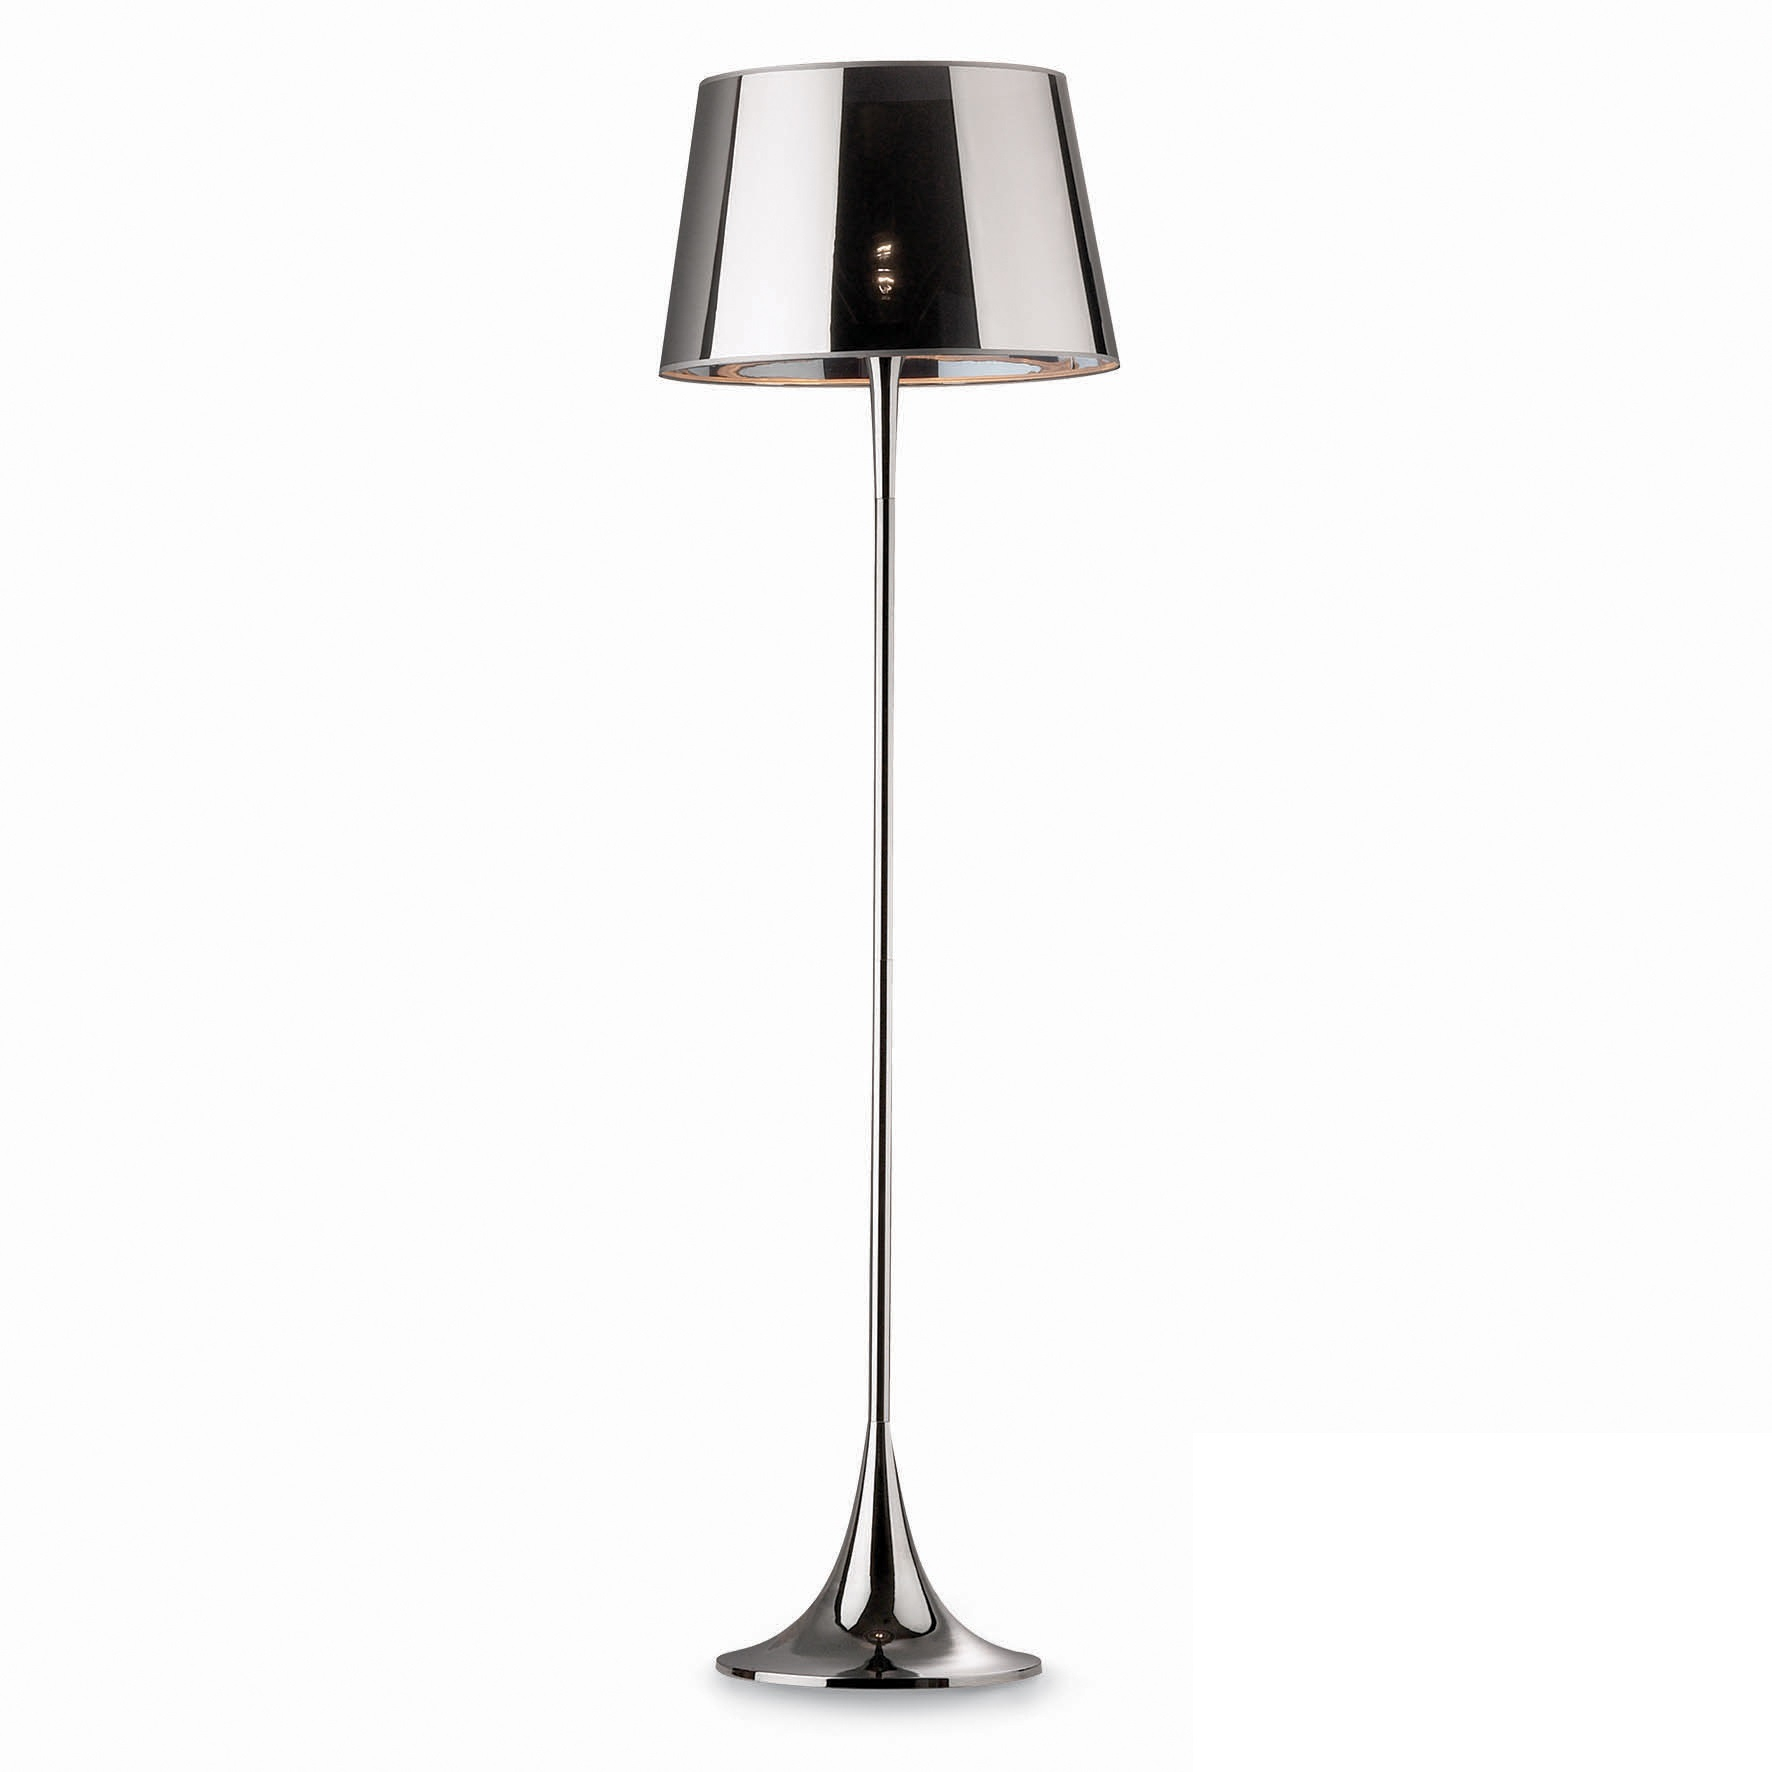 Ideallux London Pt1 Modern Floor Lamp Metal Chrome Mirrored Shade intended for proportions 1772 X 1772